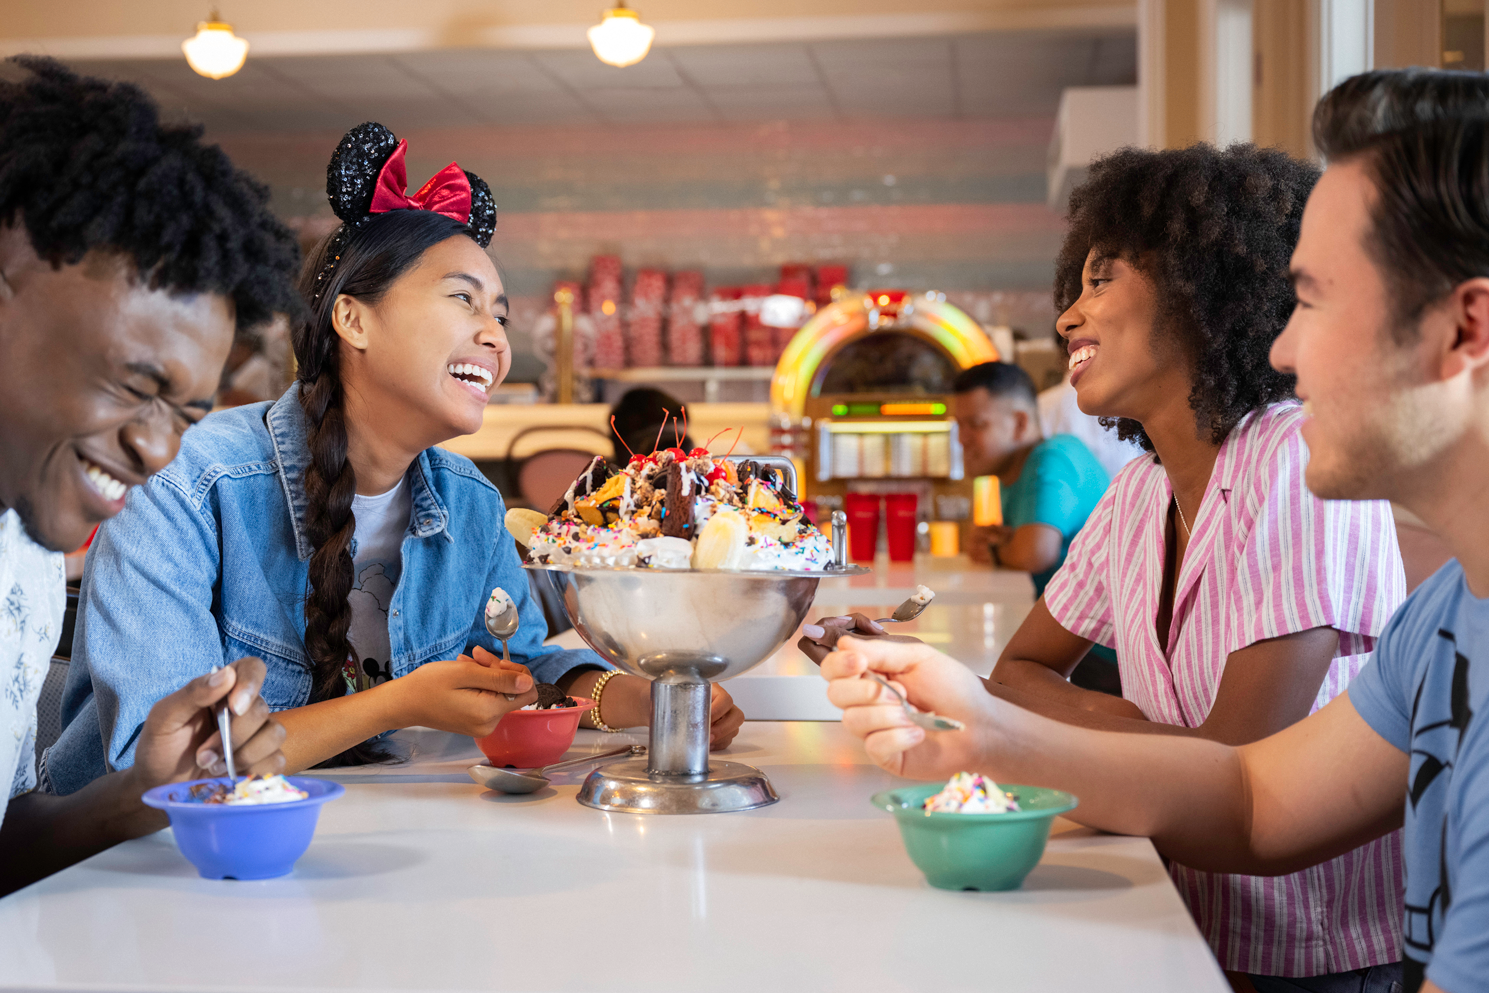 Friends sharing a bowl of ice cream at Disney